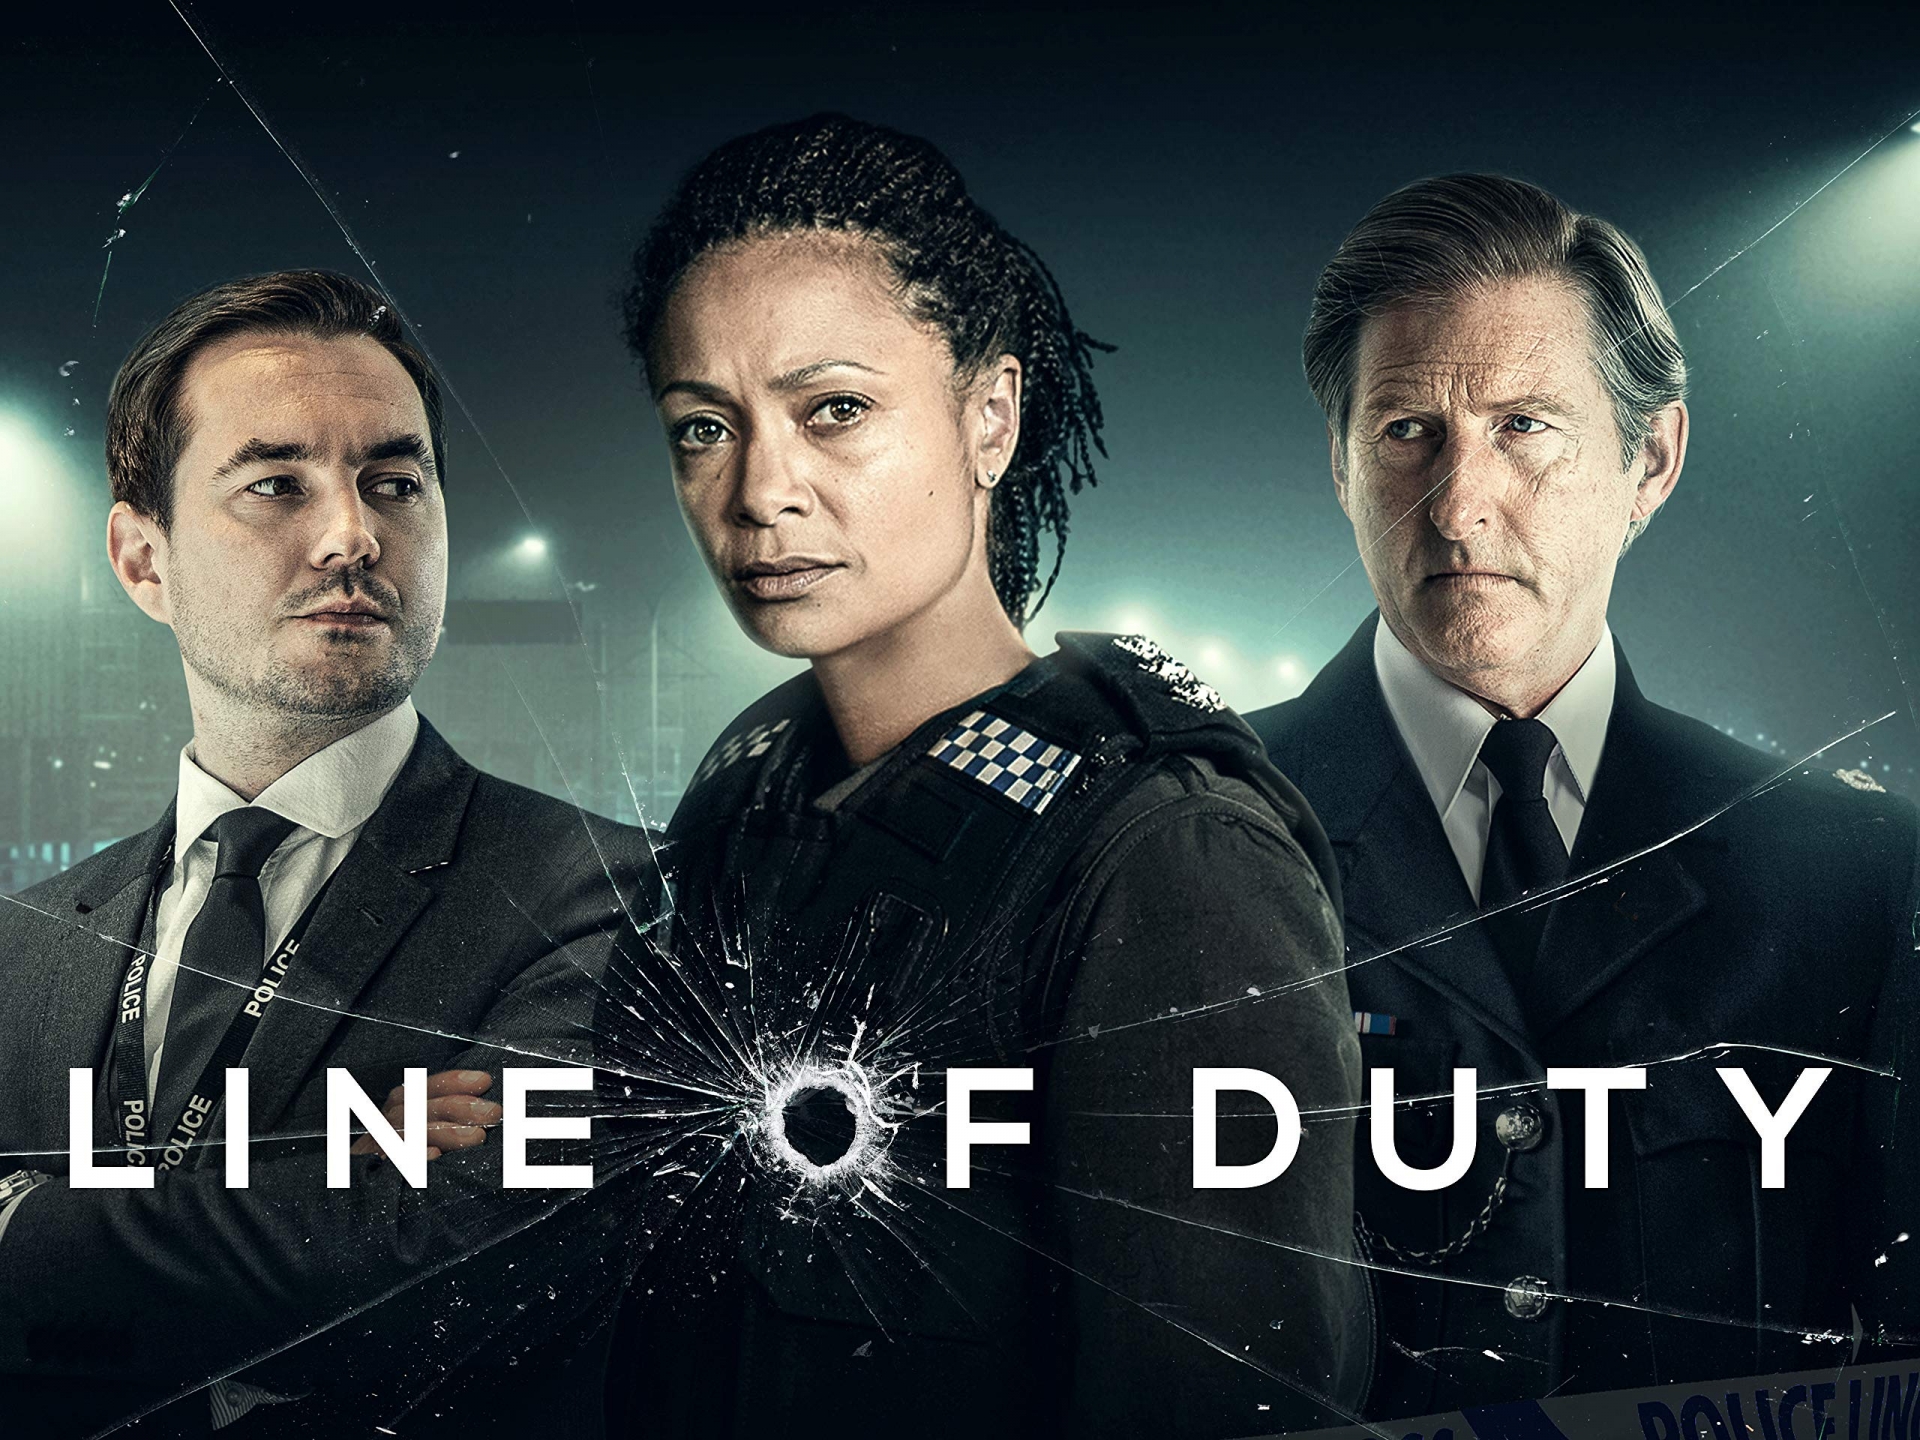 Check out 15 series to watch follow Line of Duty. Photo: Amazon